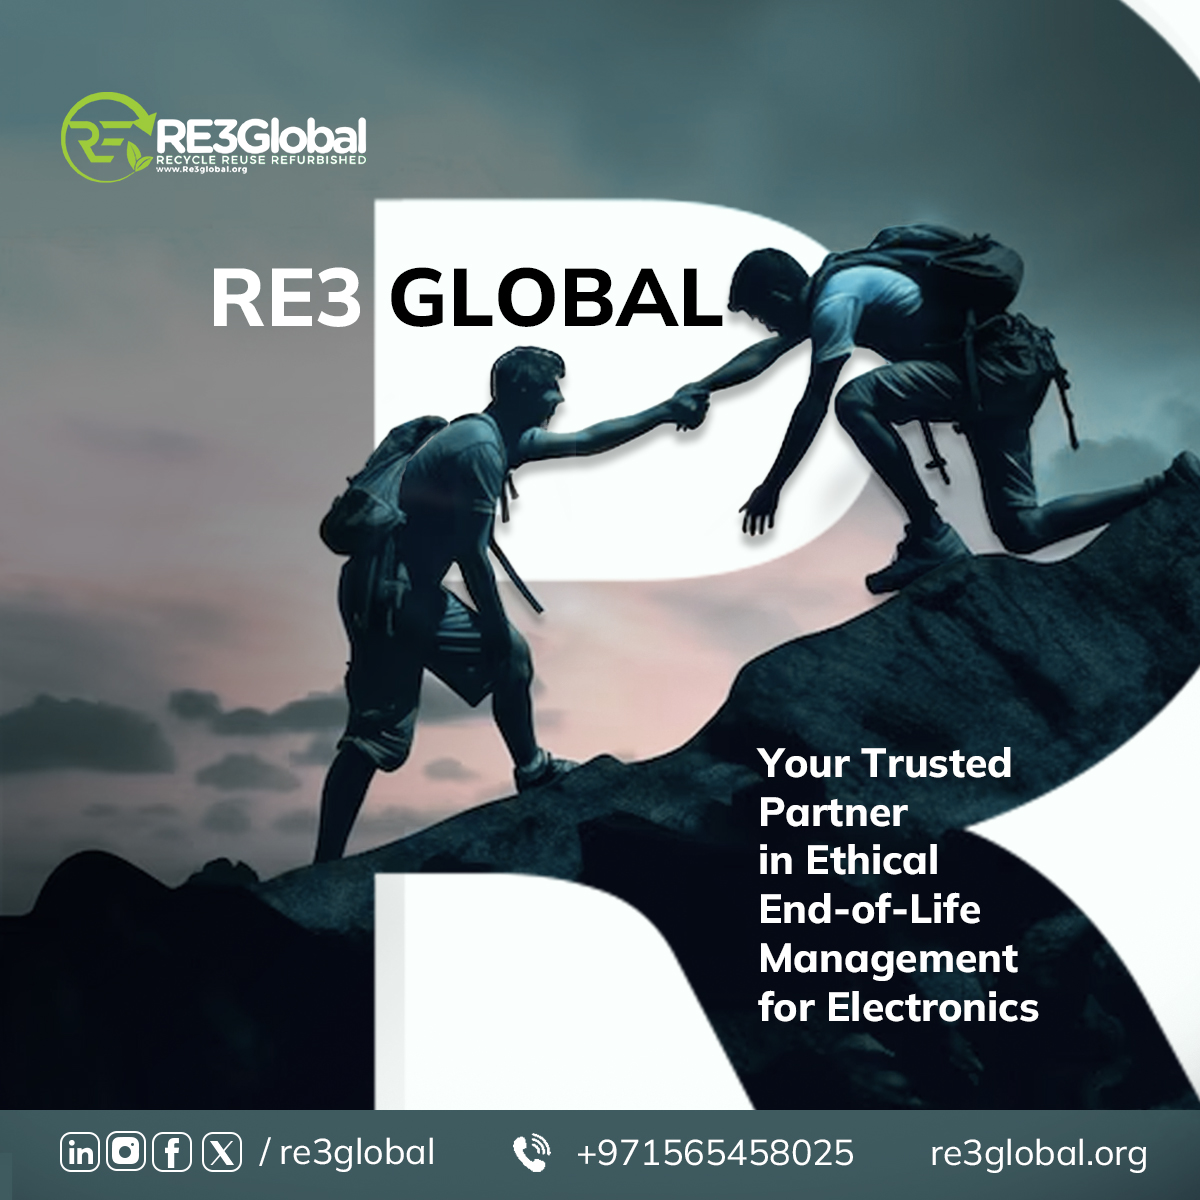 Trust RE3 Global for ethical end-of-life electronics management. With 10 years of global experience, we offer custom solutions to avoid landfill and hazardous disposal.

Re3global.org

#re3global #electronicwaste #recycle #reuse #refurbish #uae #dubai #zerowaste